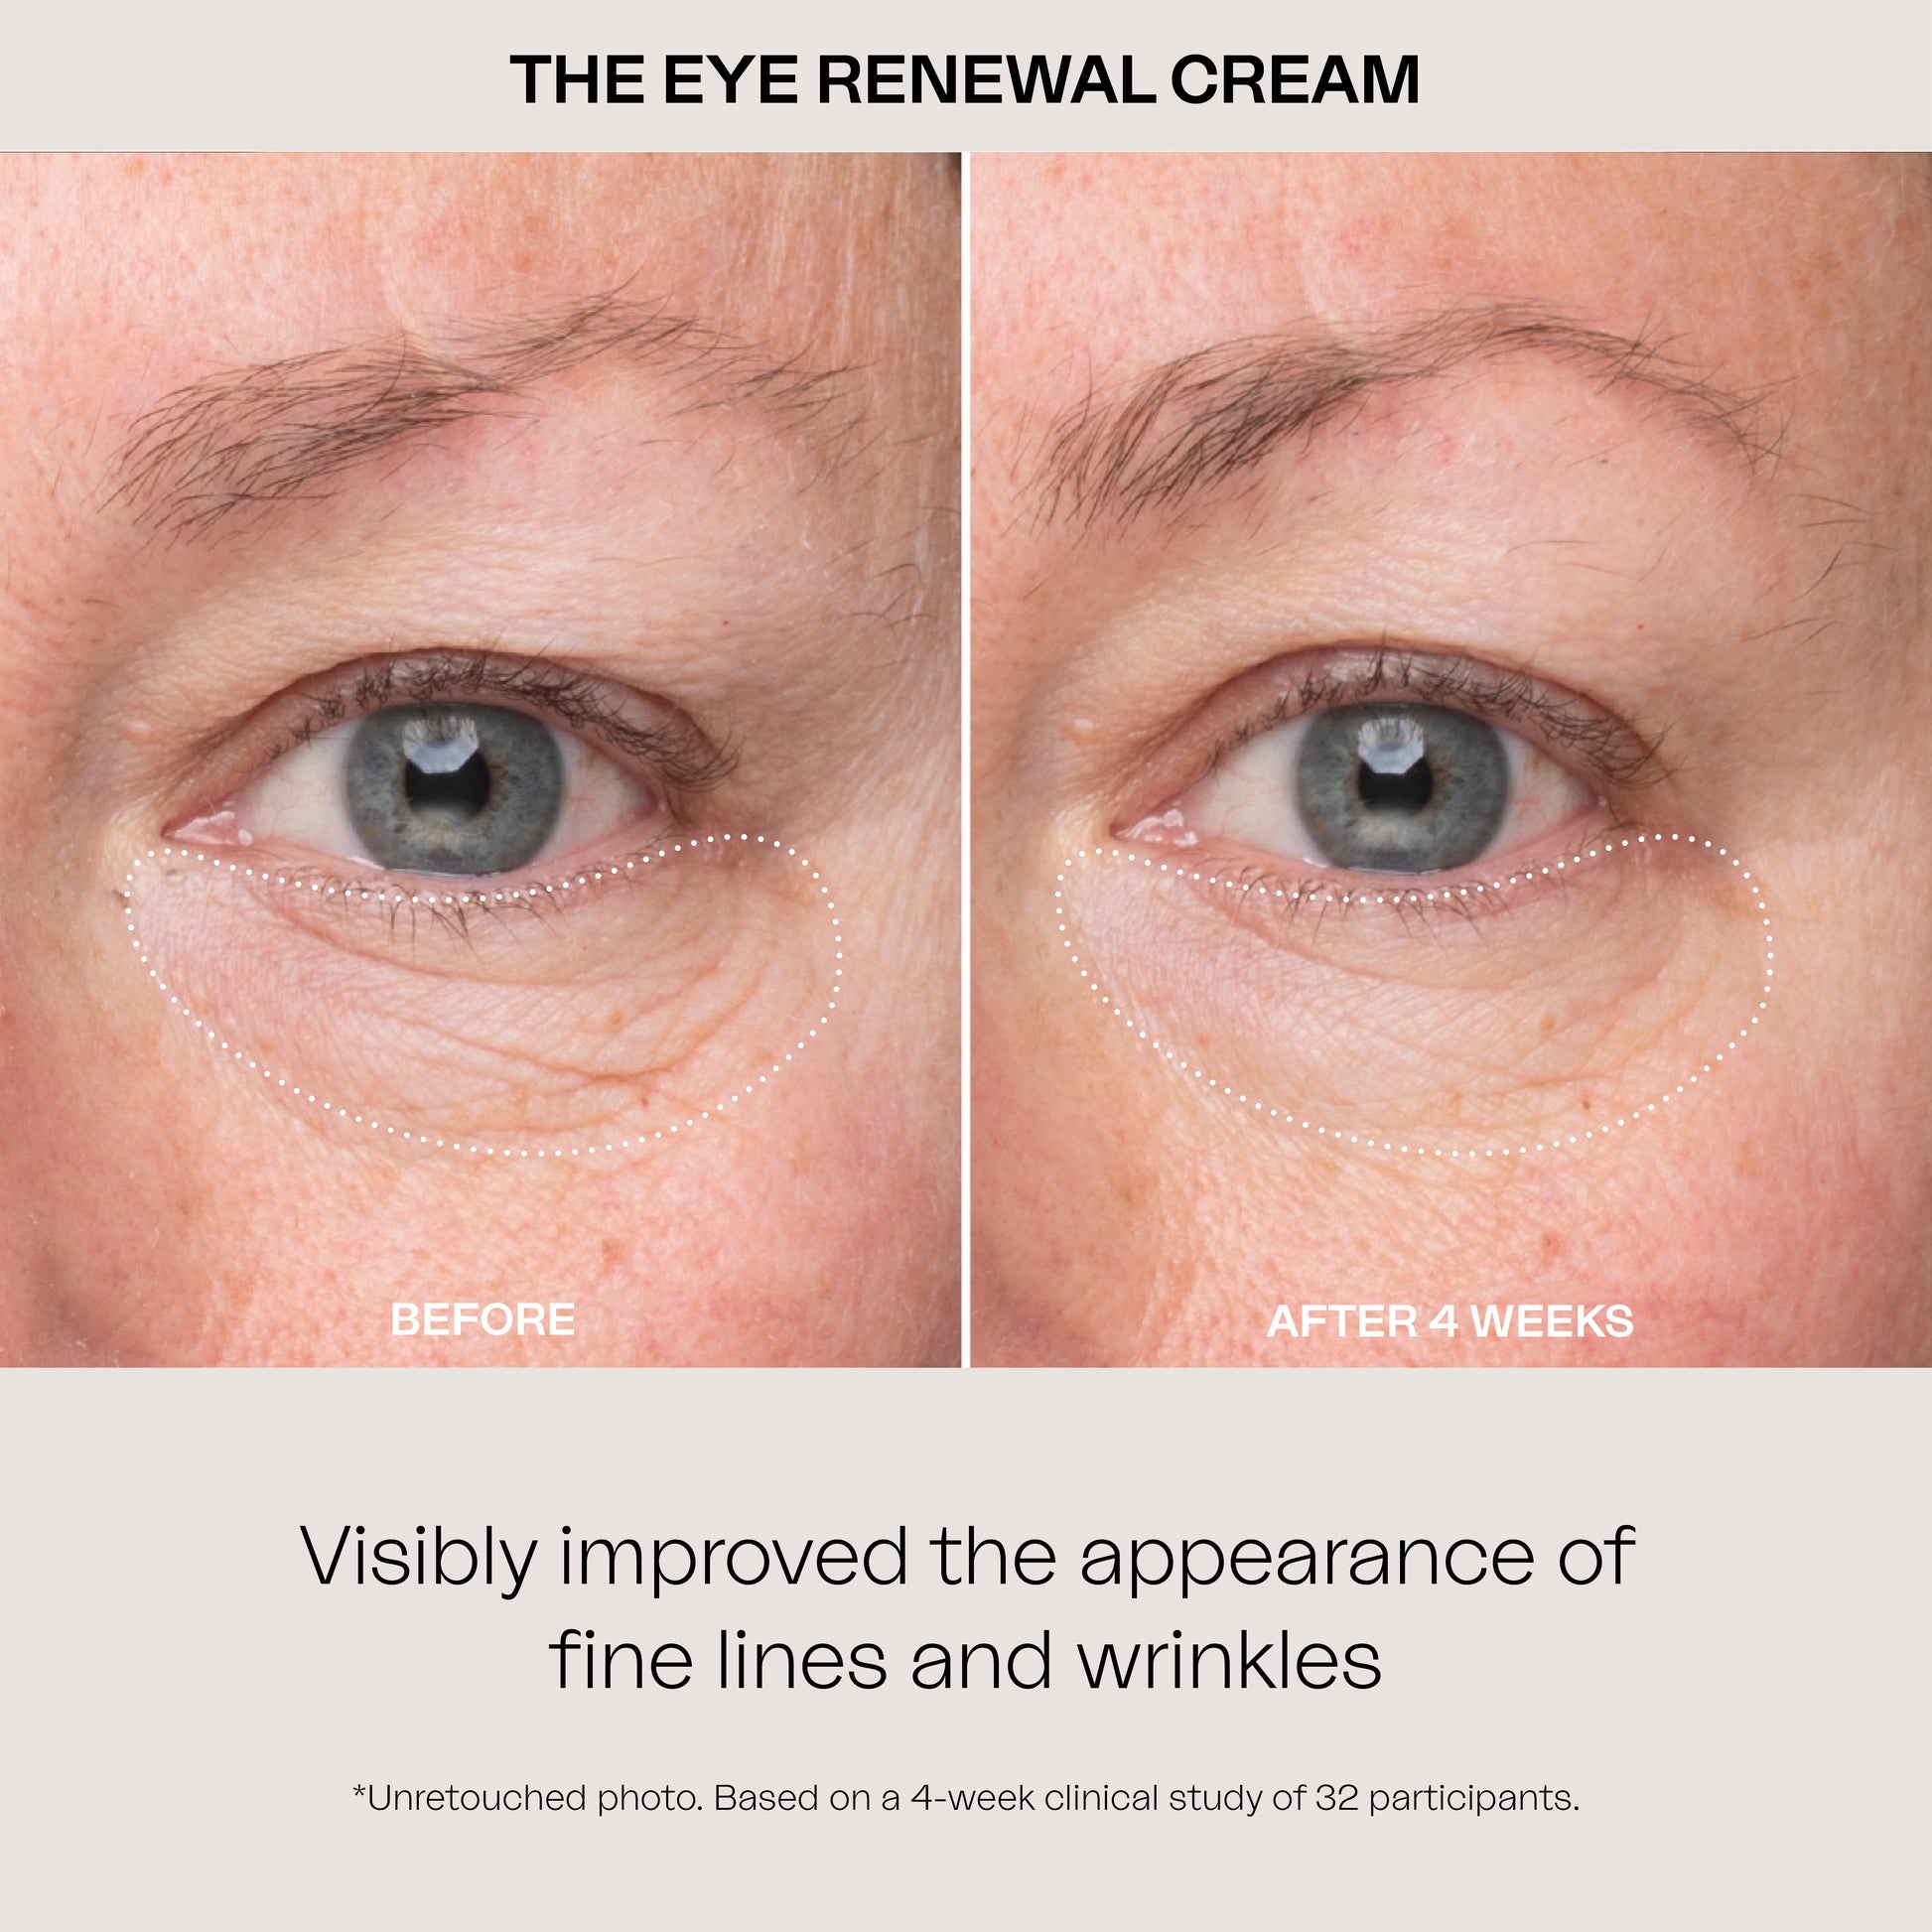 Eighth Day Skin The Eye Renewal Cream. Visibly improved the appearance of fine lines and wrinkles. Based on a 4-week clinical study of 32 participants.